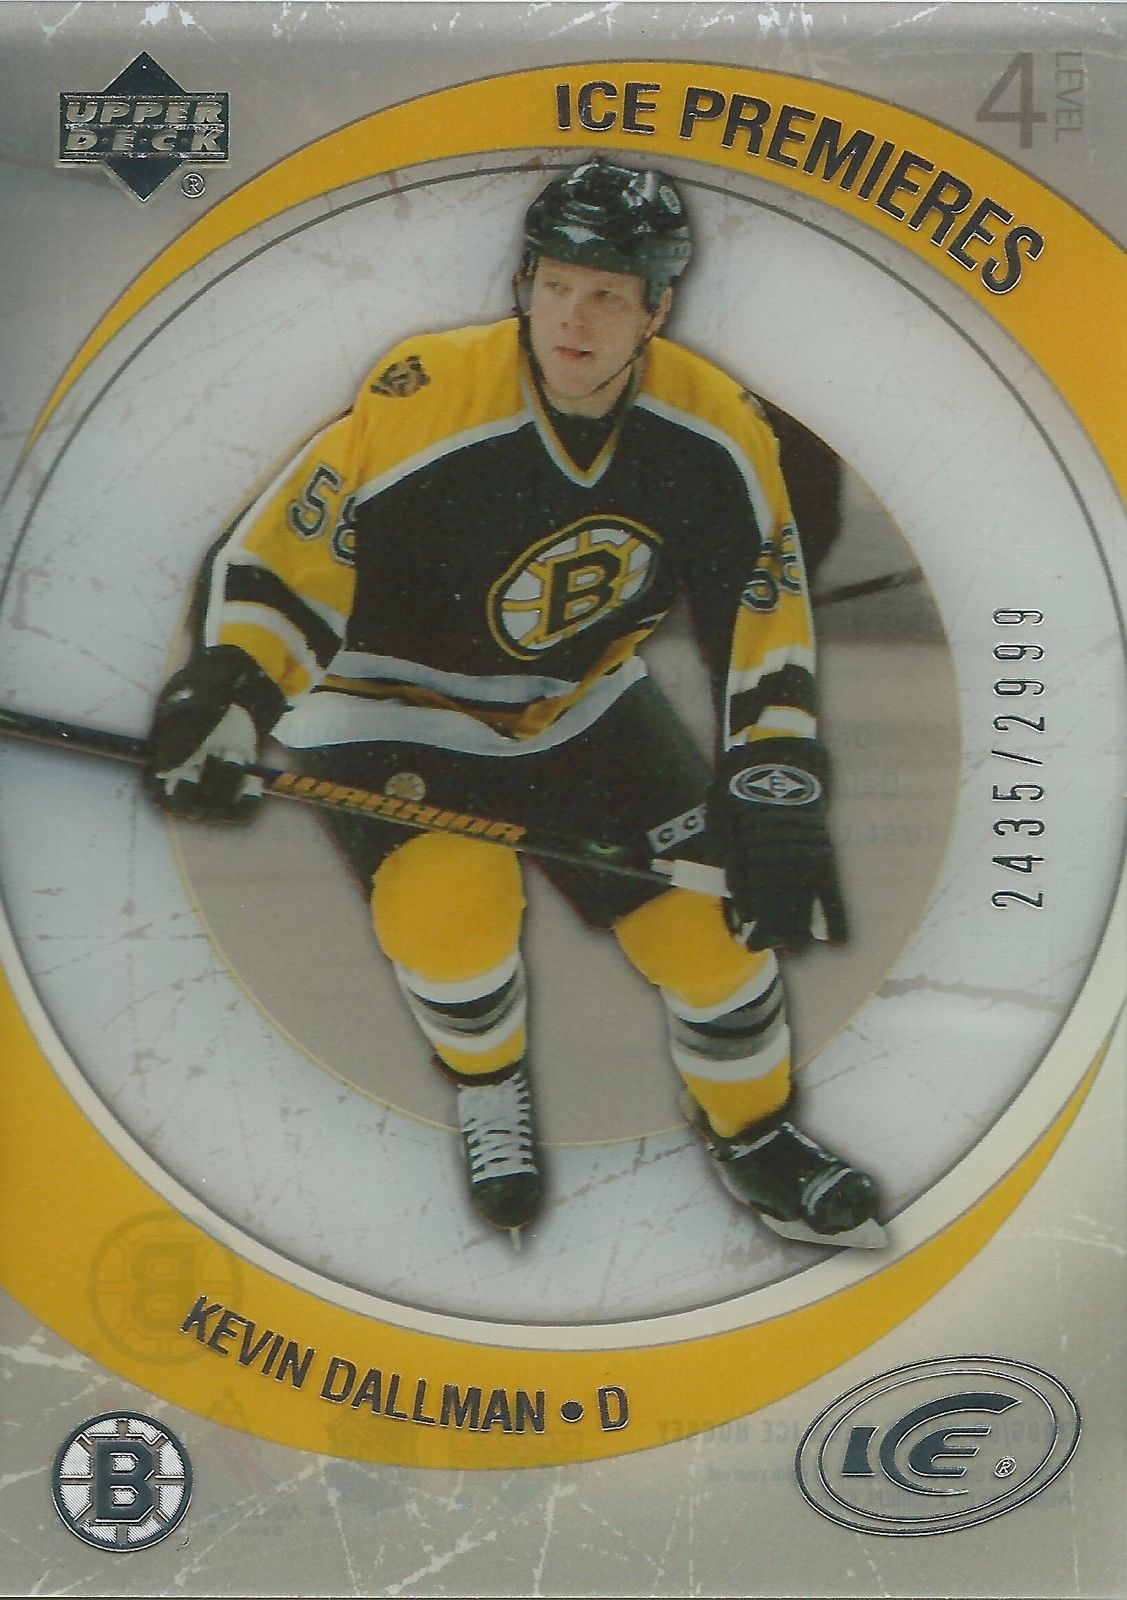  2005-06 UD Ice KEVIN DALLMAN RC #/2999 Ice Premiers  Rookie 01398 Image 1